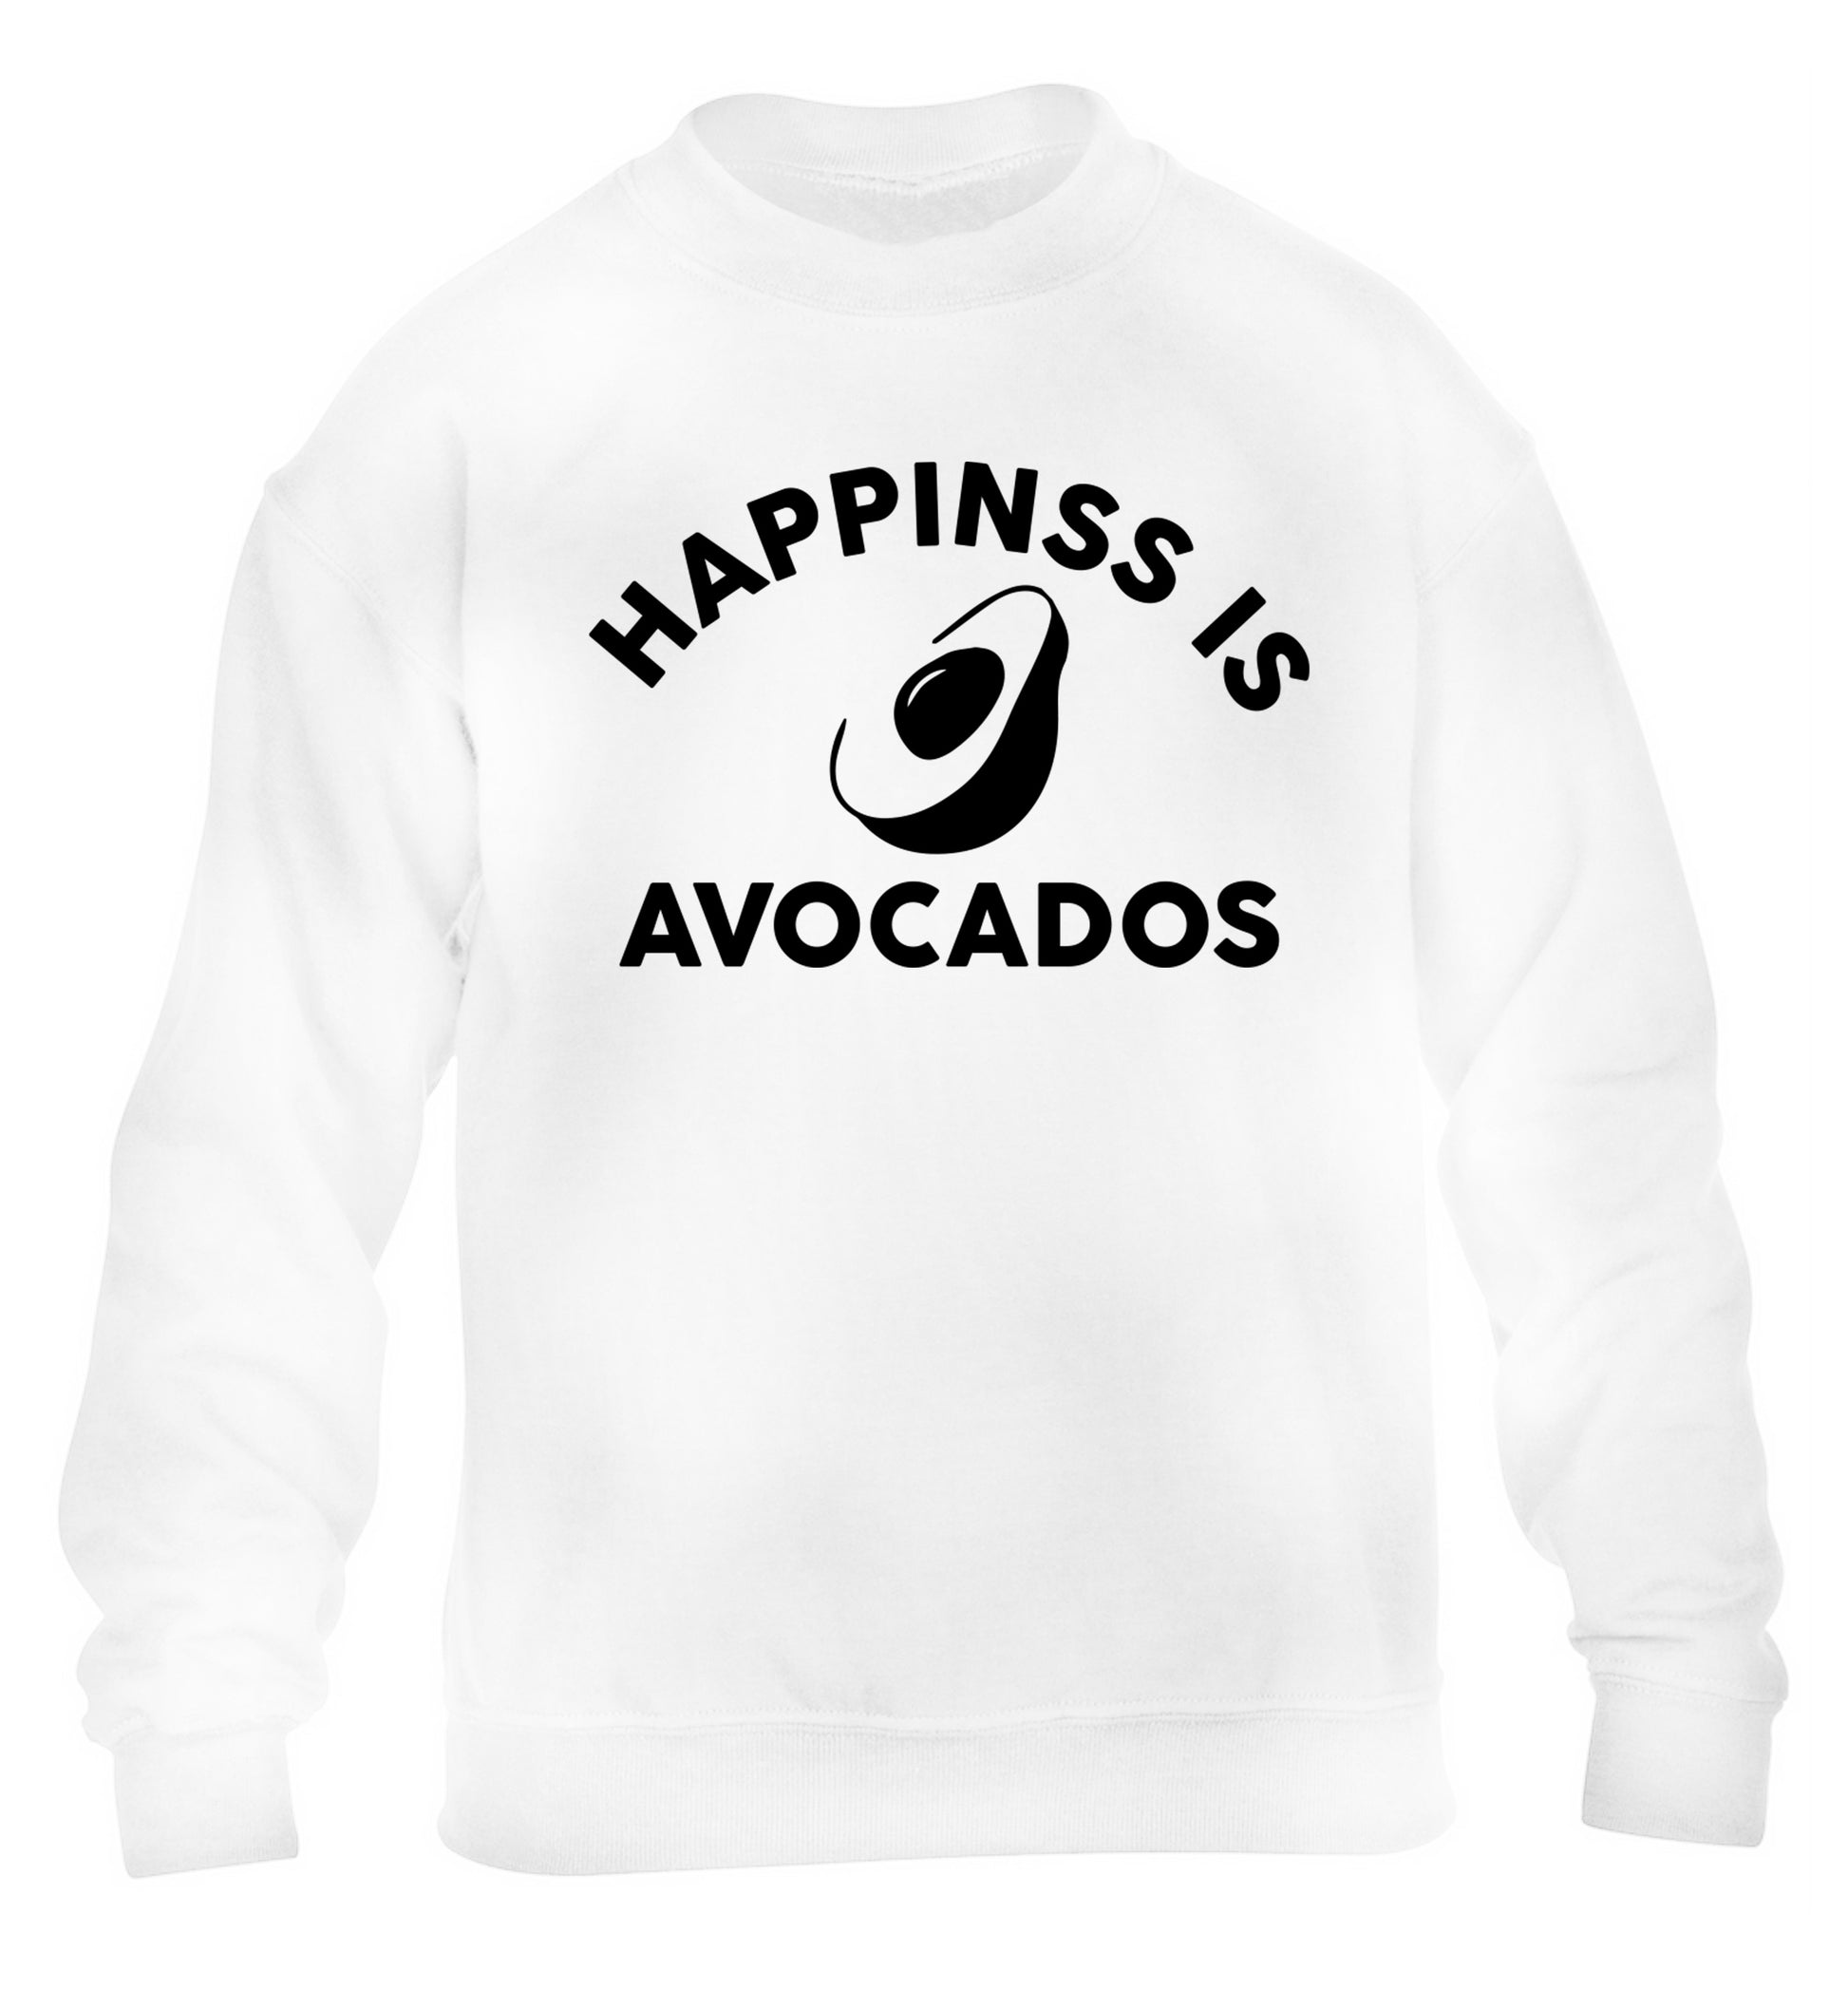 Happiness is avocados children's white sweater 12-14 Years